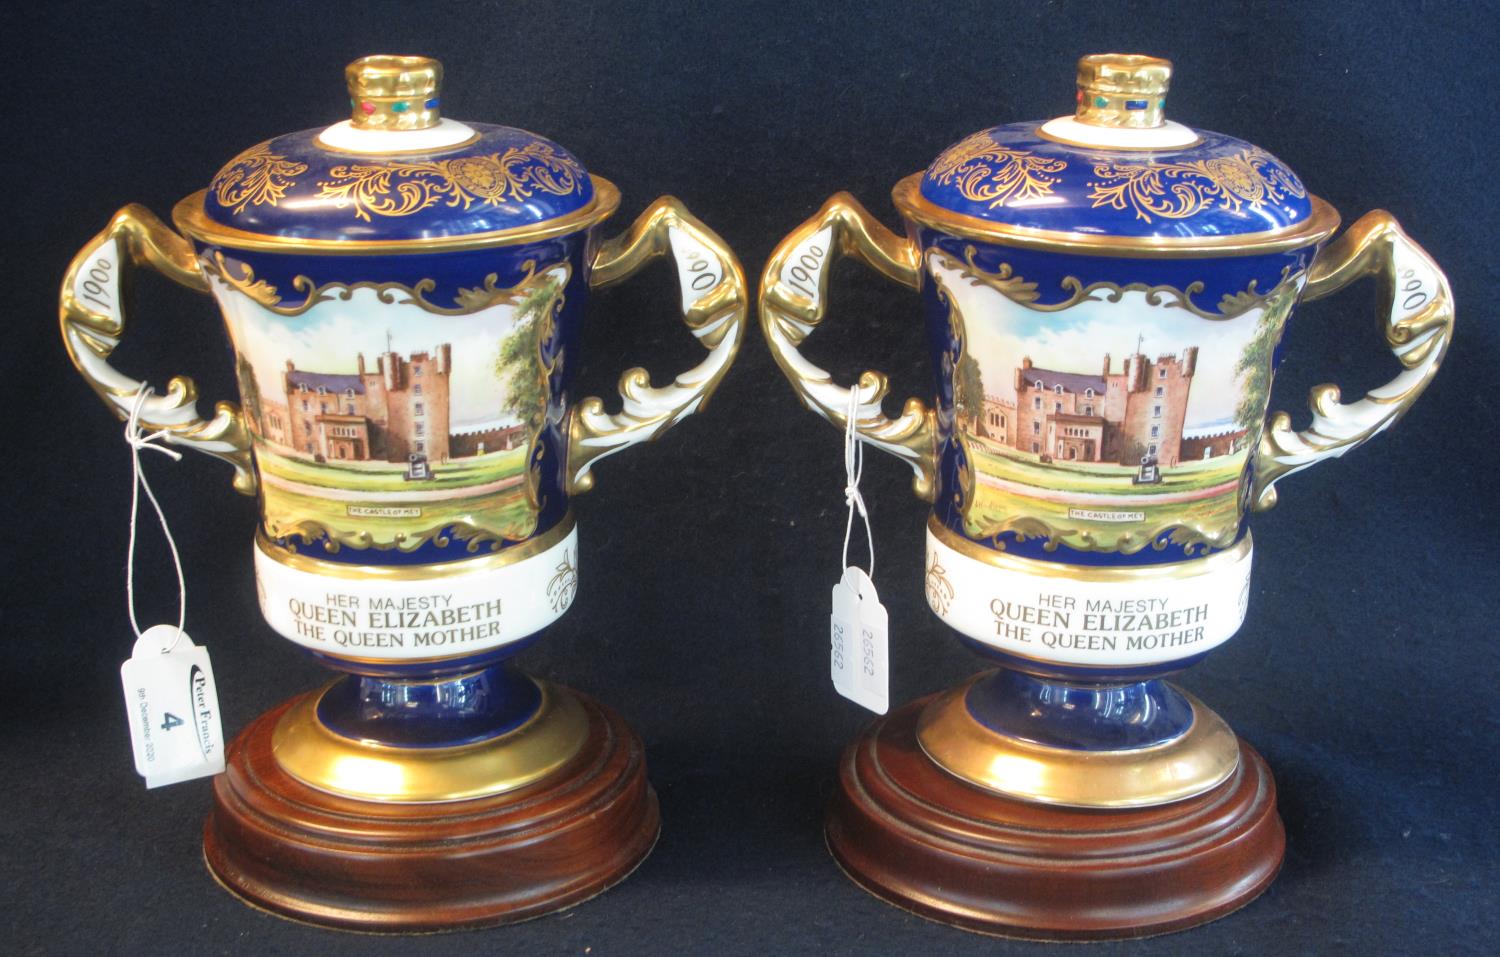 Two Aynsley bone china hand painted lidded two handled commemorative vases for Her Majesty Queen